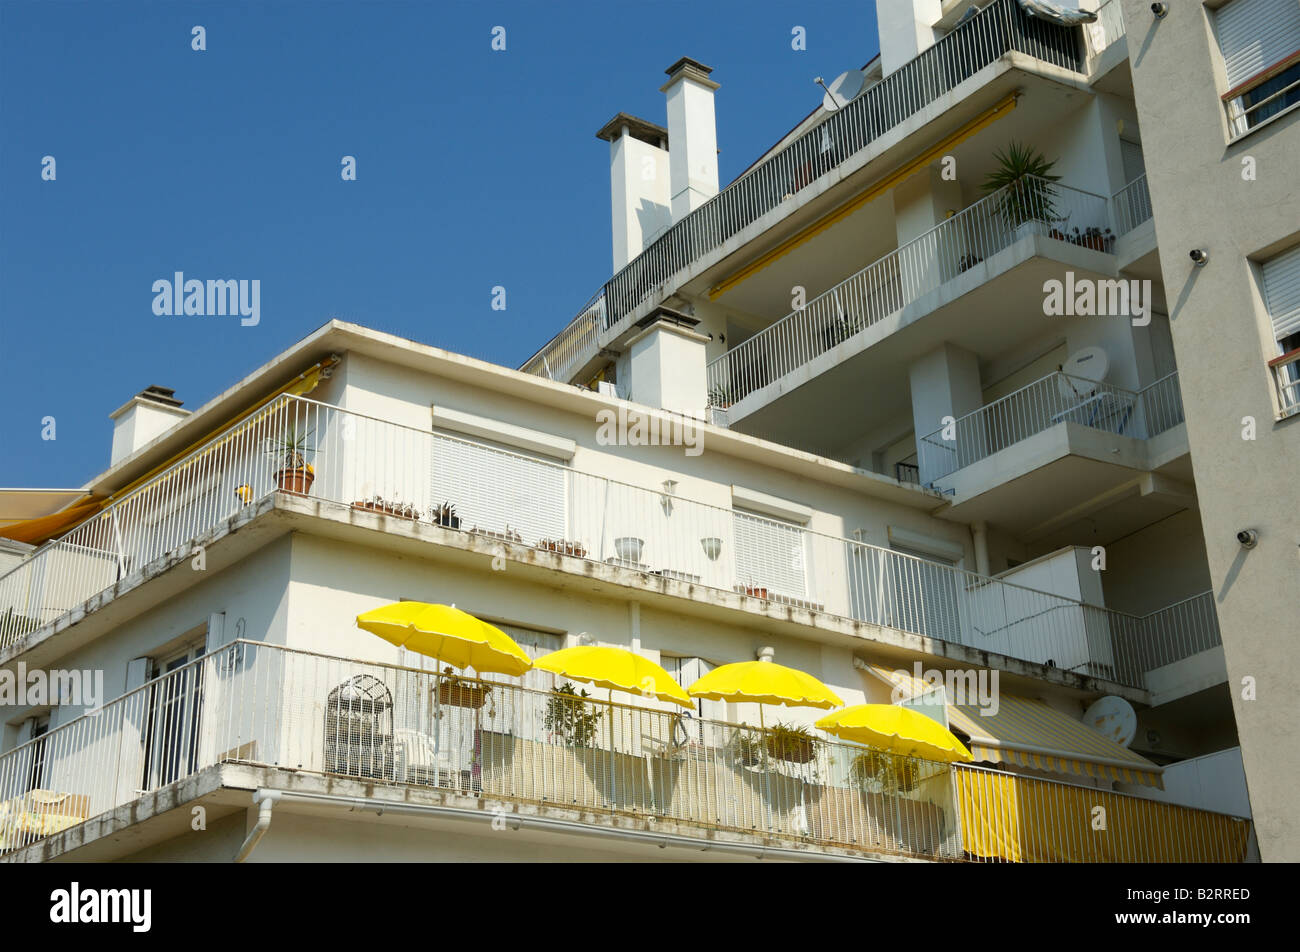 A block of holiday flats in the South of France Stock Photo